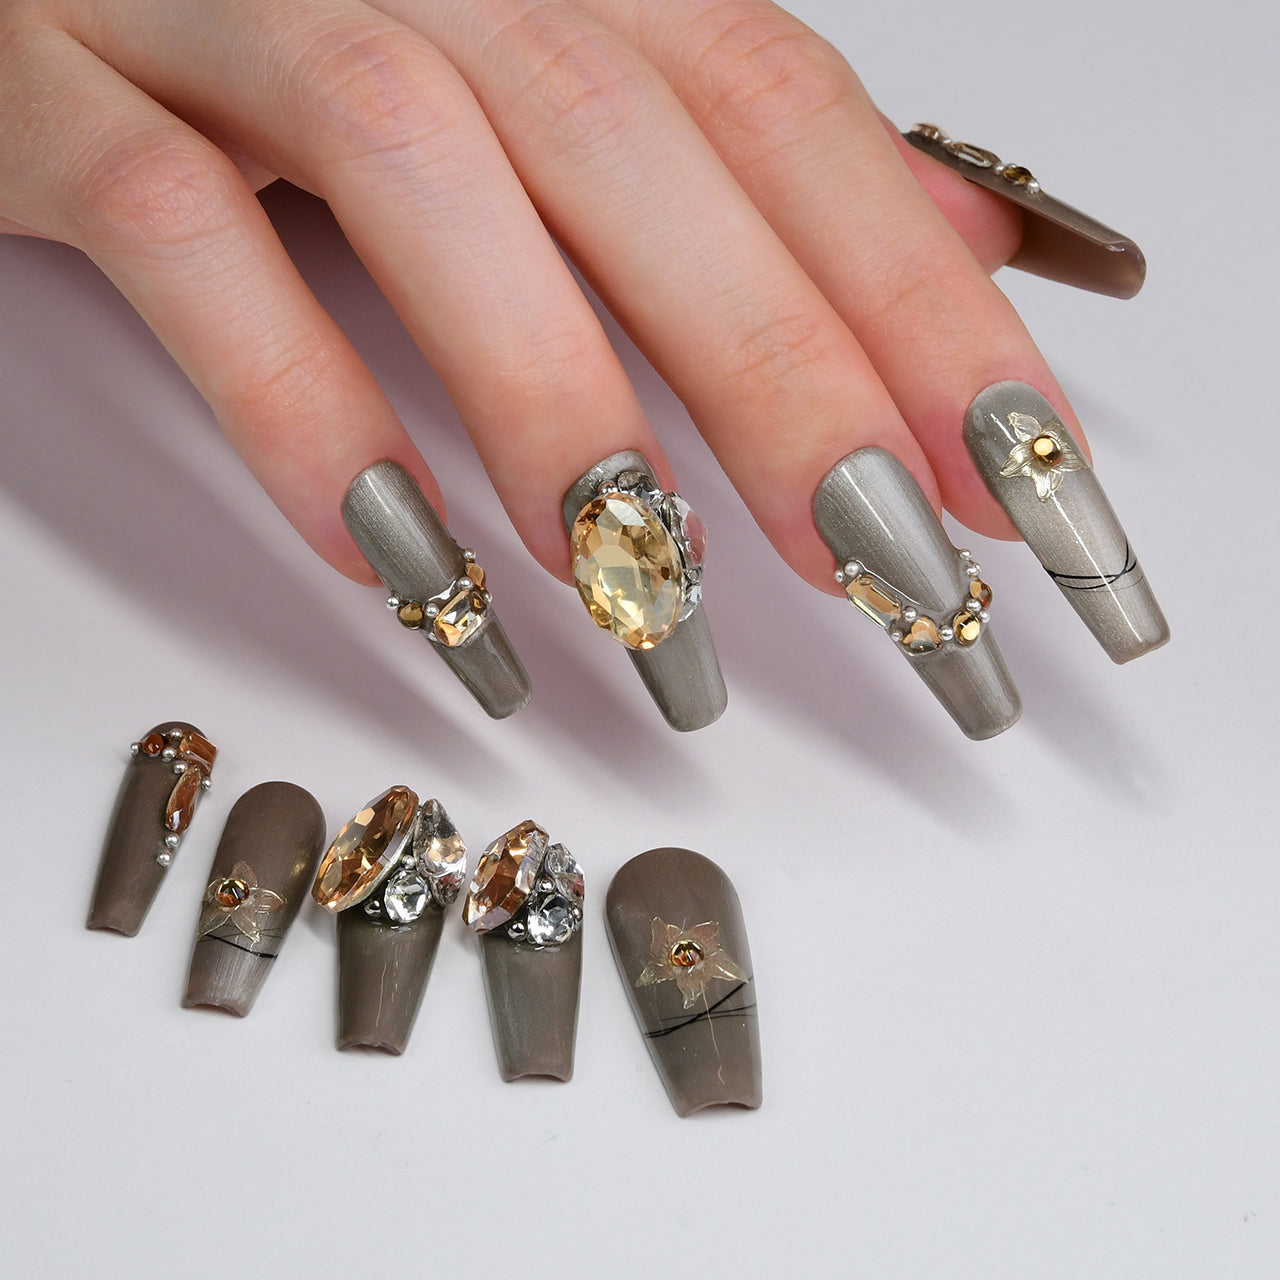 Exquisite Grey Extra Long Coffin Arcylic Handmade Press On Nails With Diamond -BEYONDCANVA